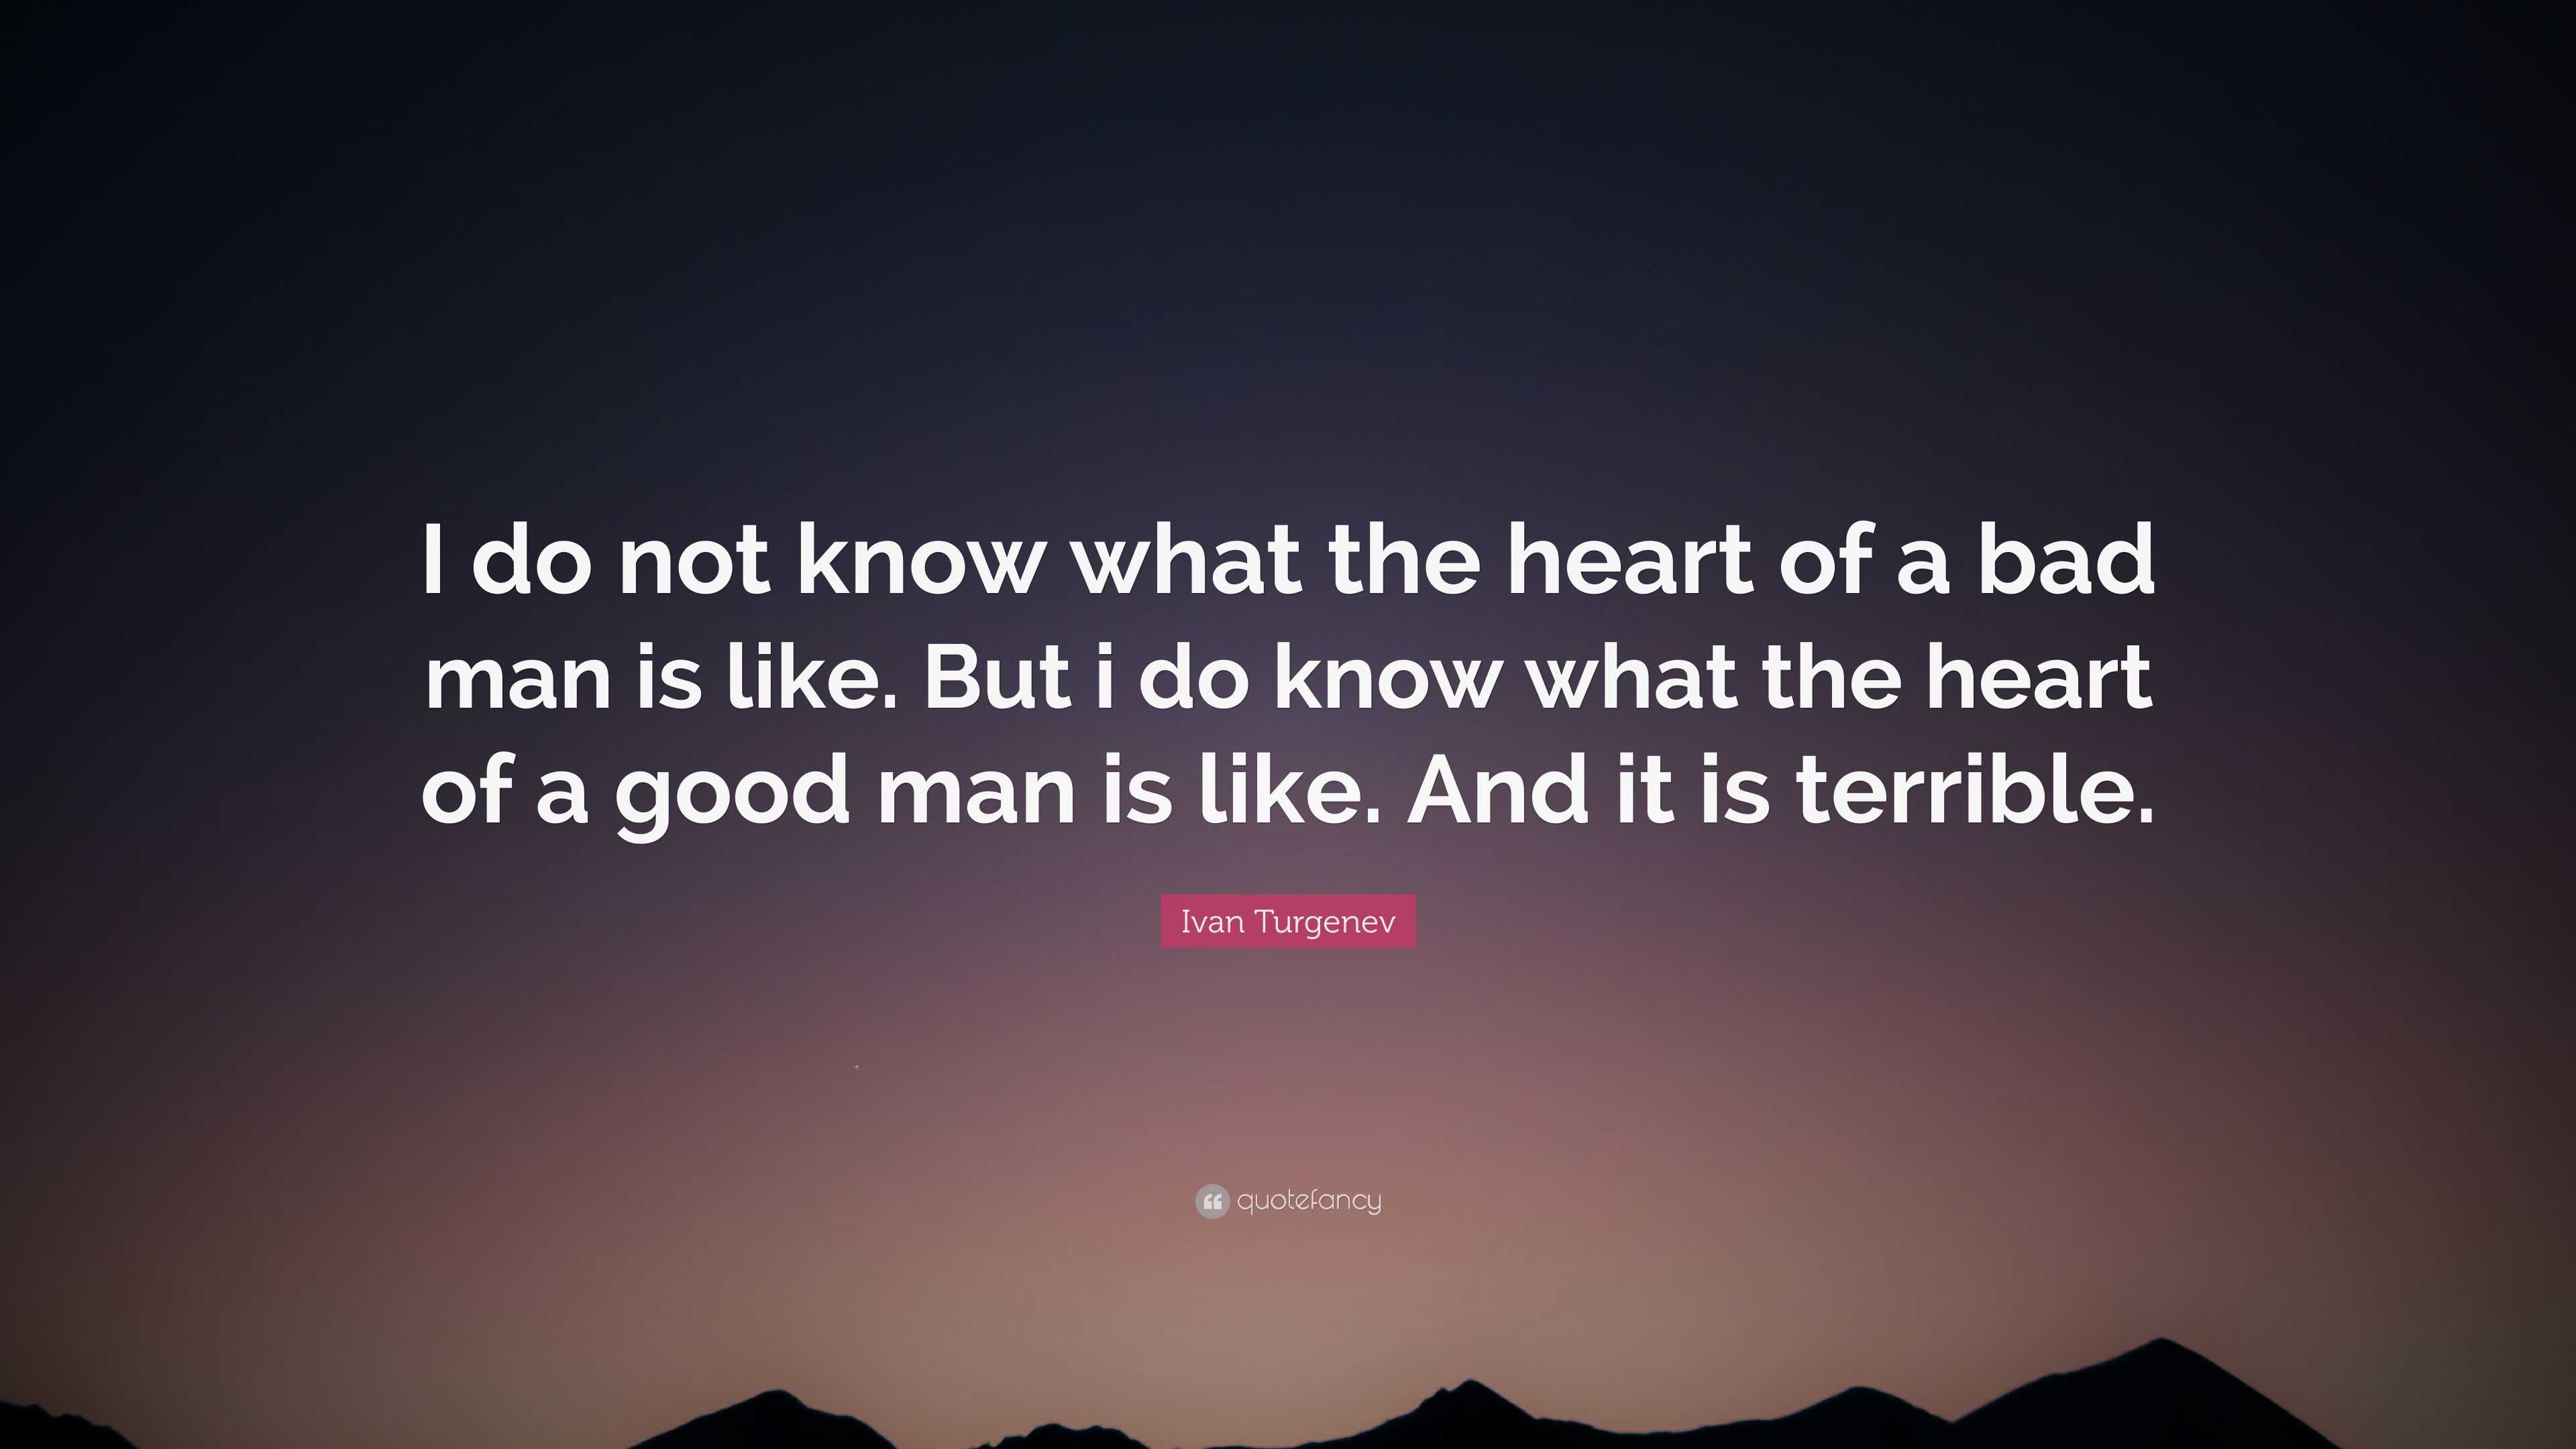 Ivan Turgenev Quote: "I do not know what the heart of a ...